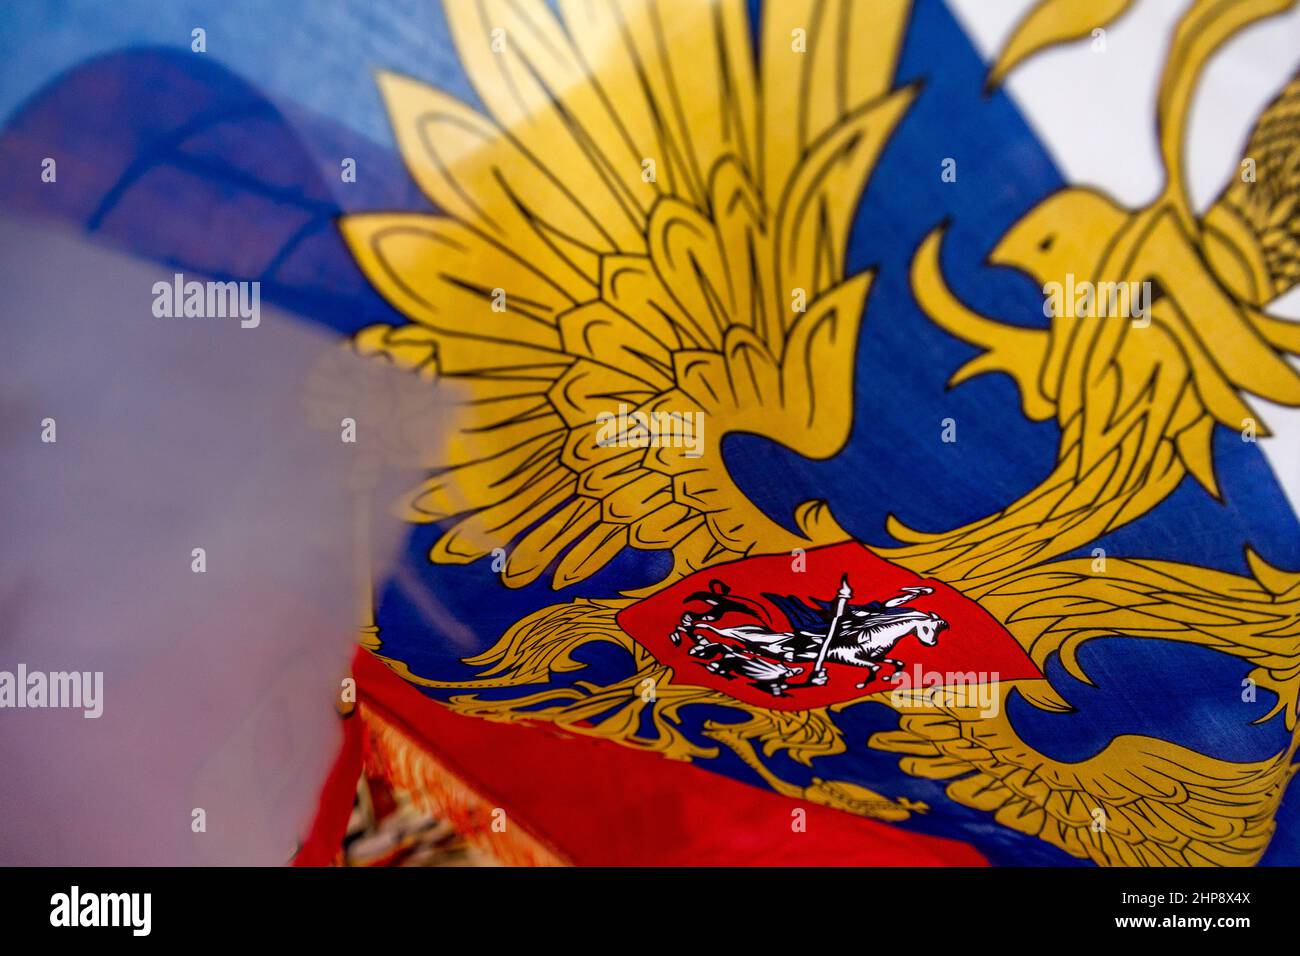 The national flag of the Russian Federation with coat of arms flutters in a wind Stock Photo